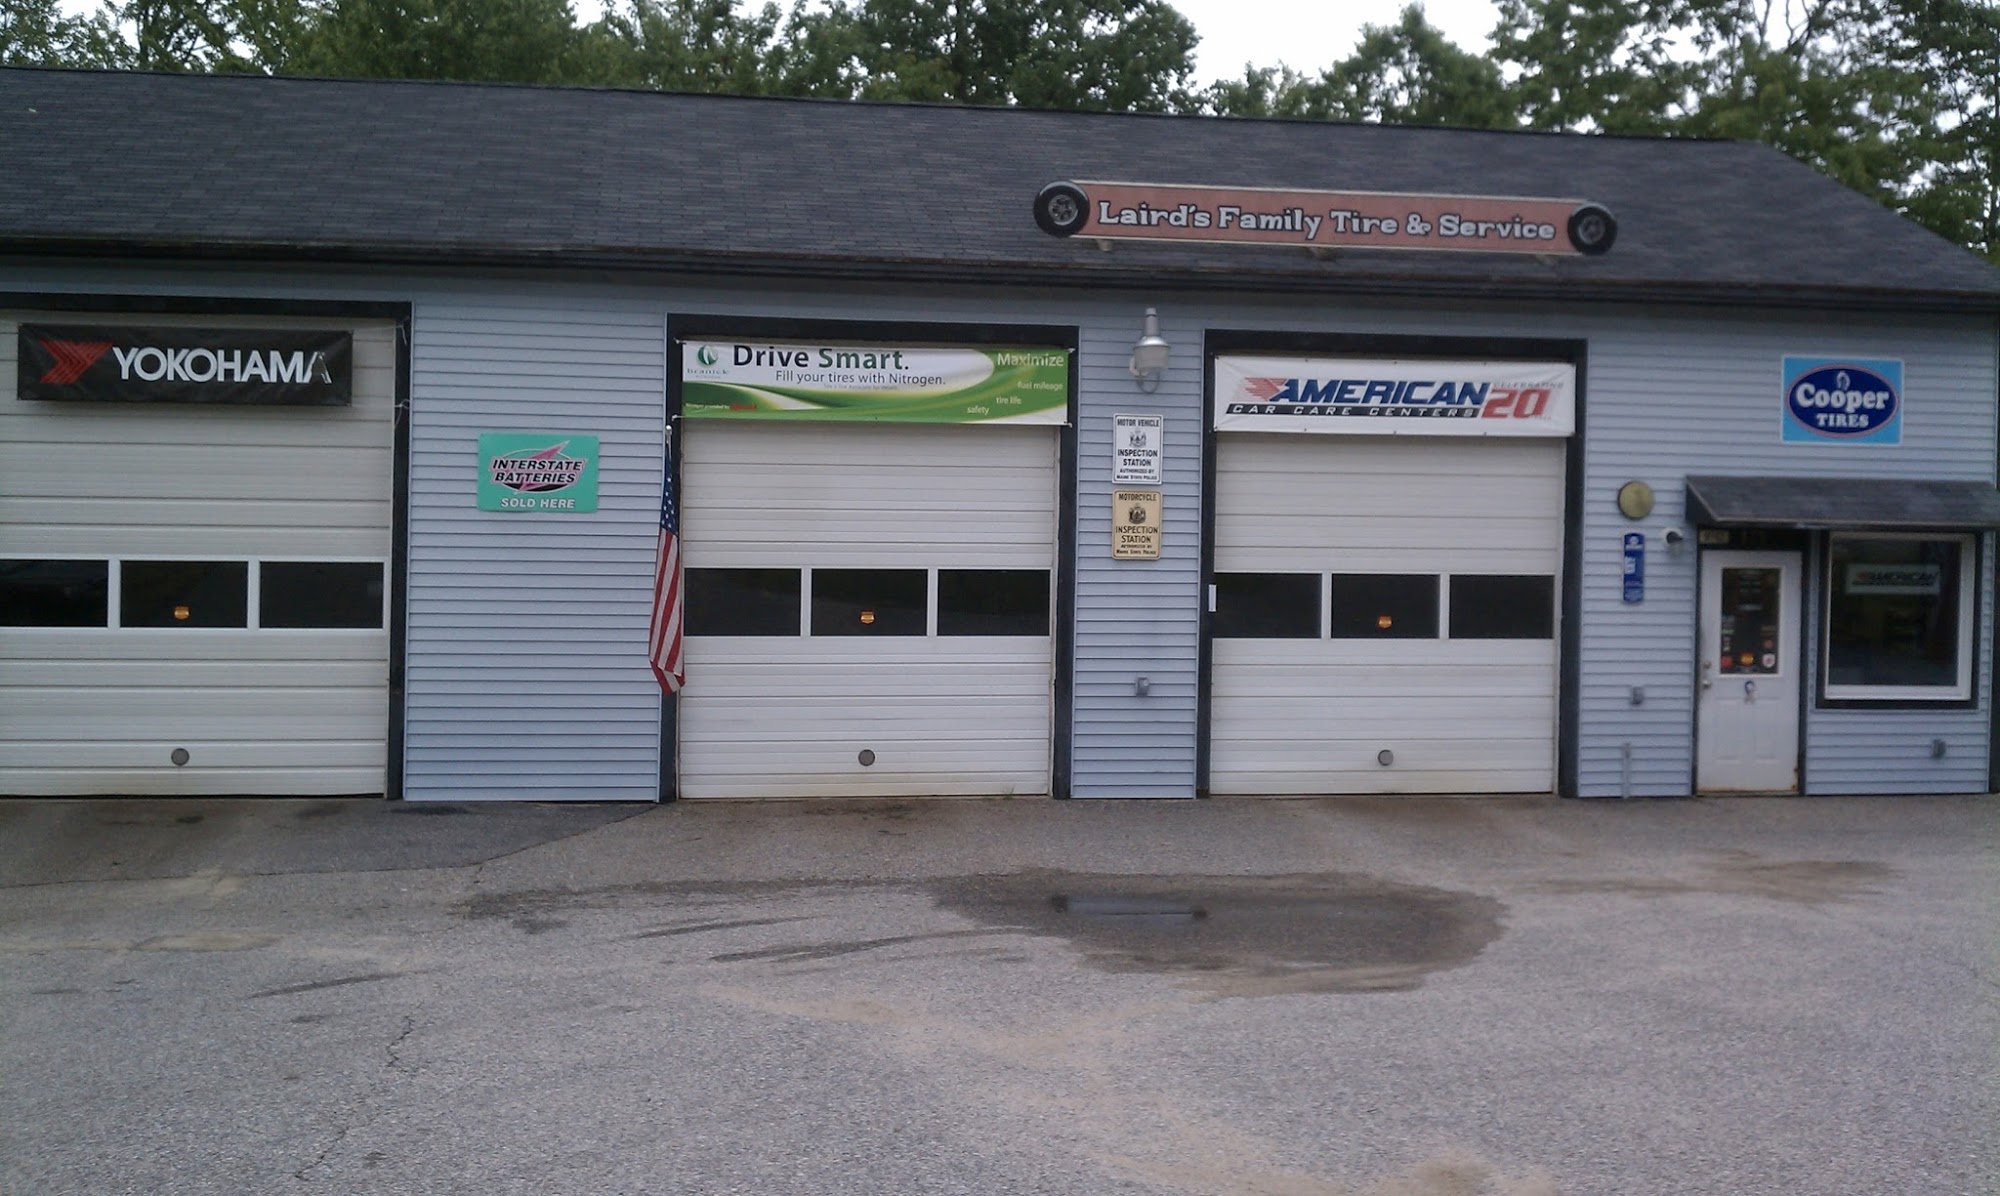 Laird's Family Tire & Services